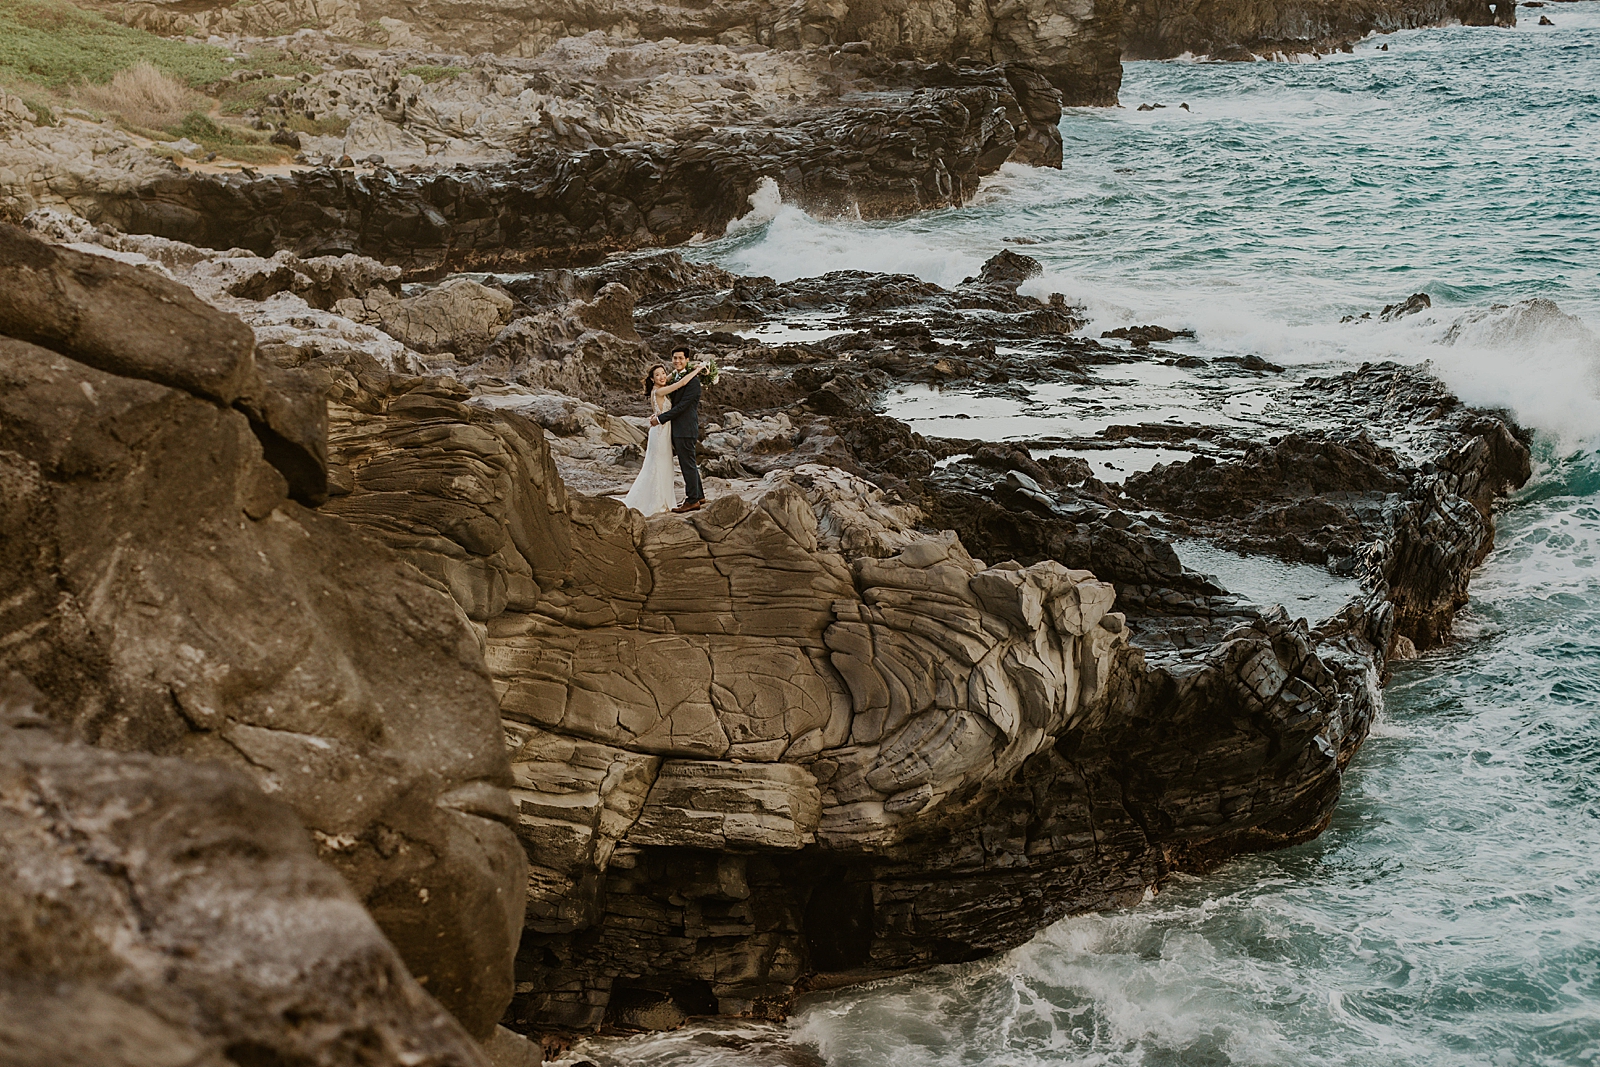 Wide shot of Bride and Groom holding each other by rocky cliffside of the ocean